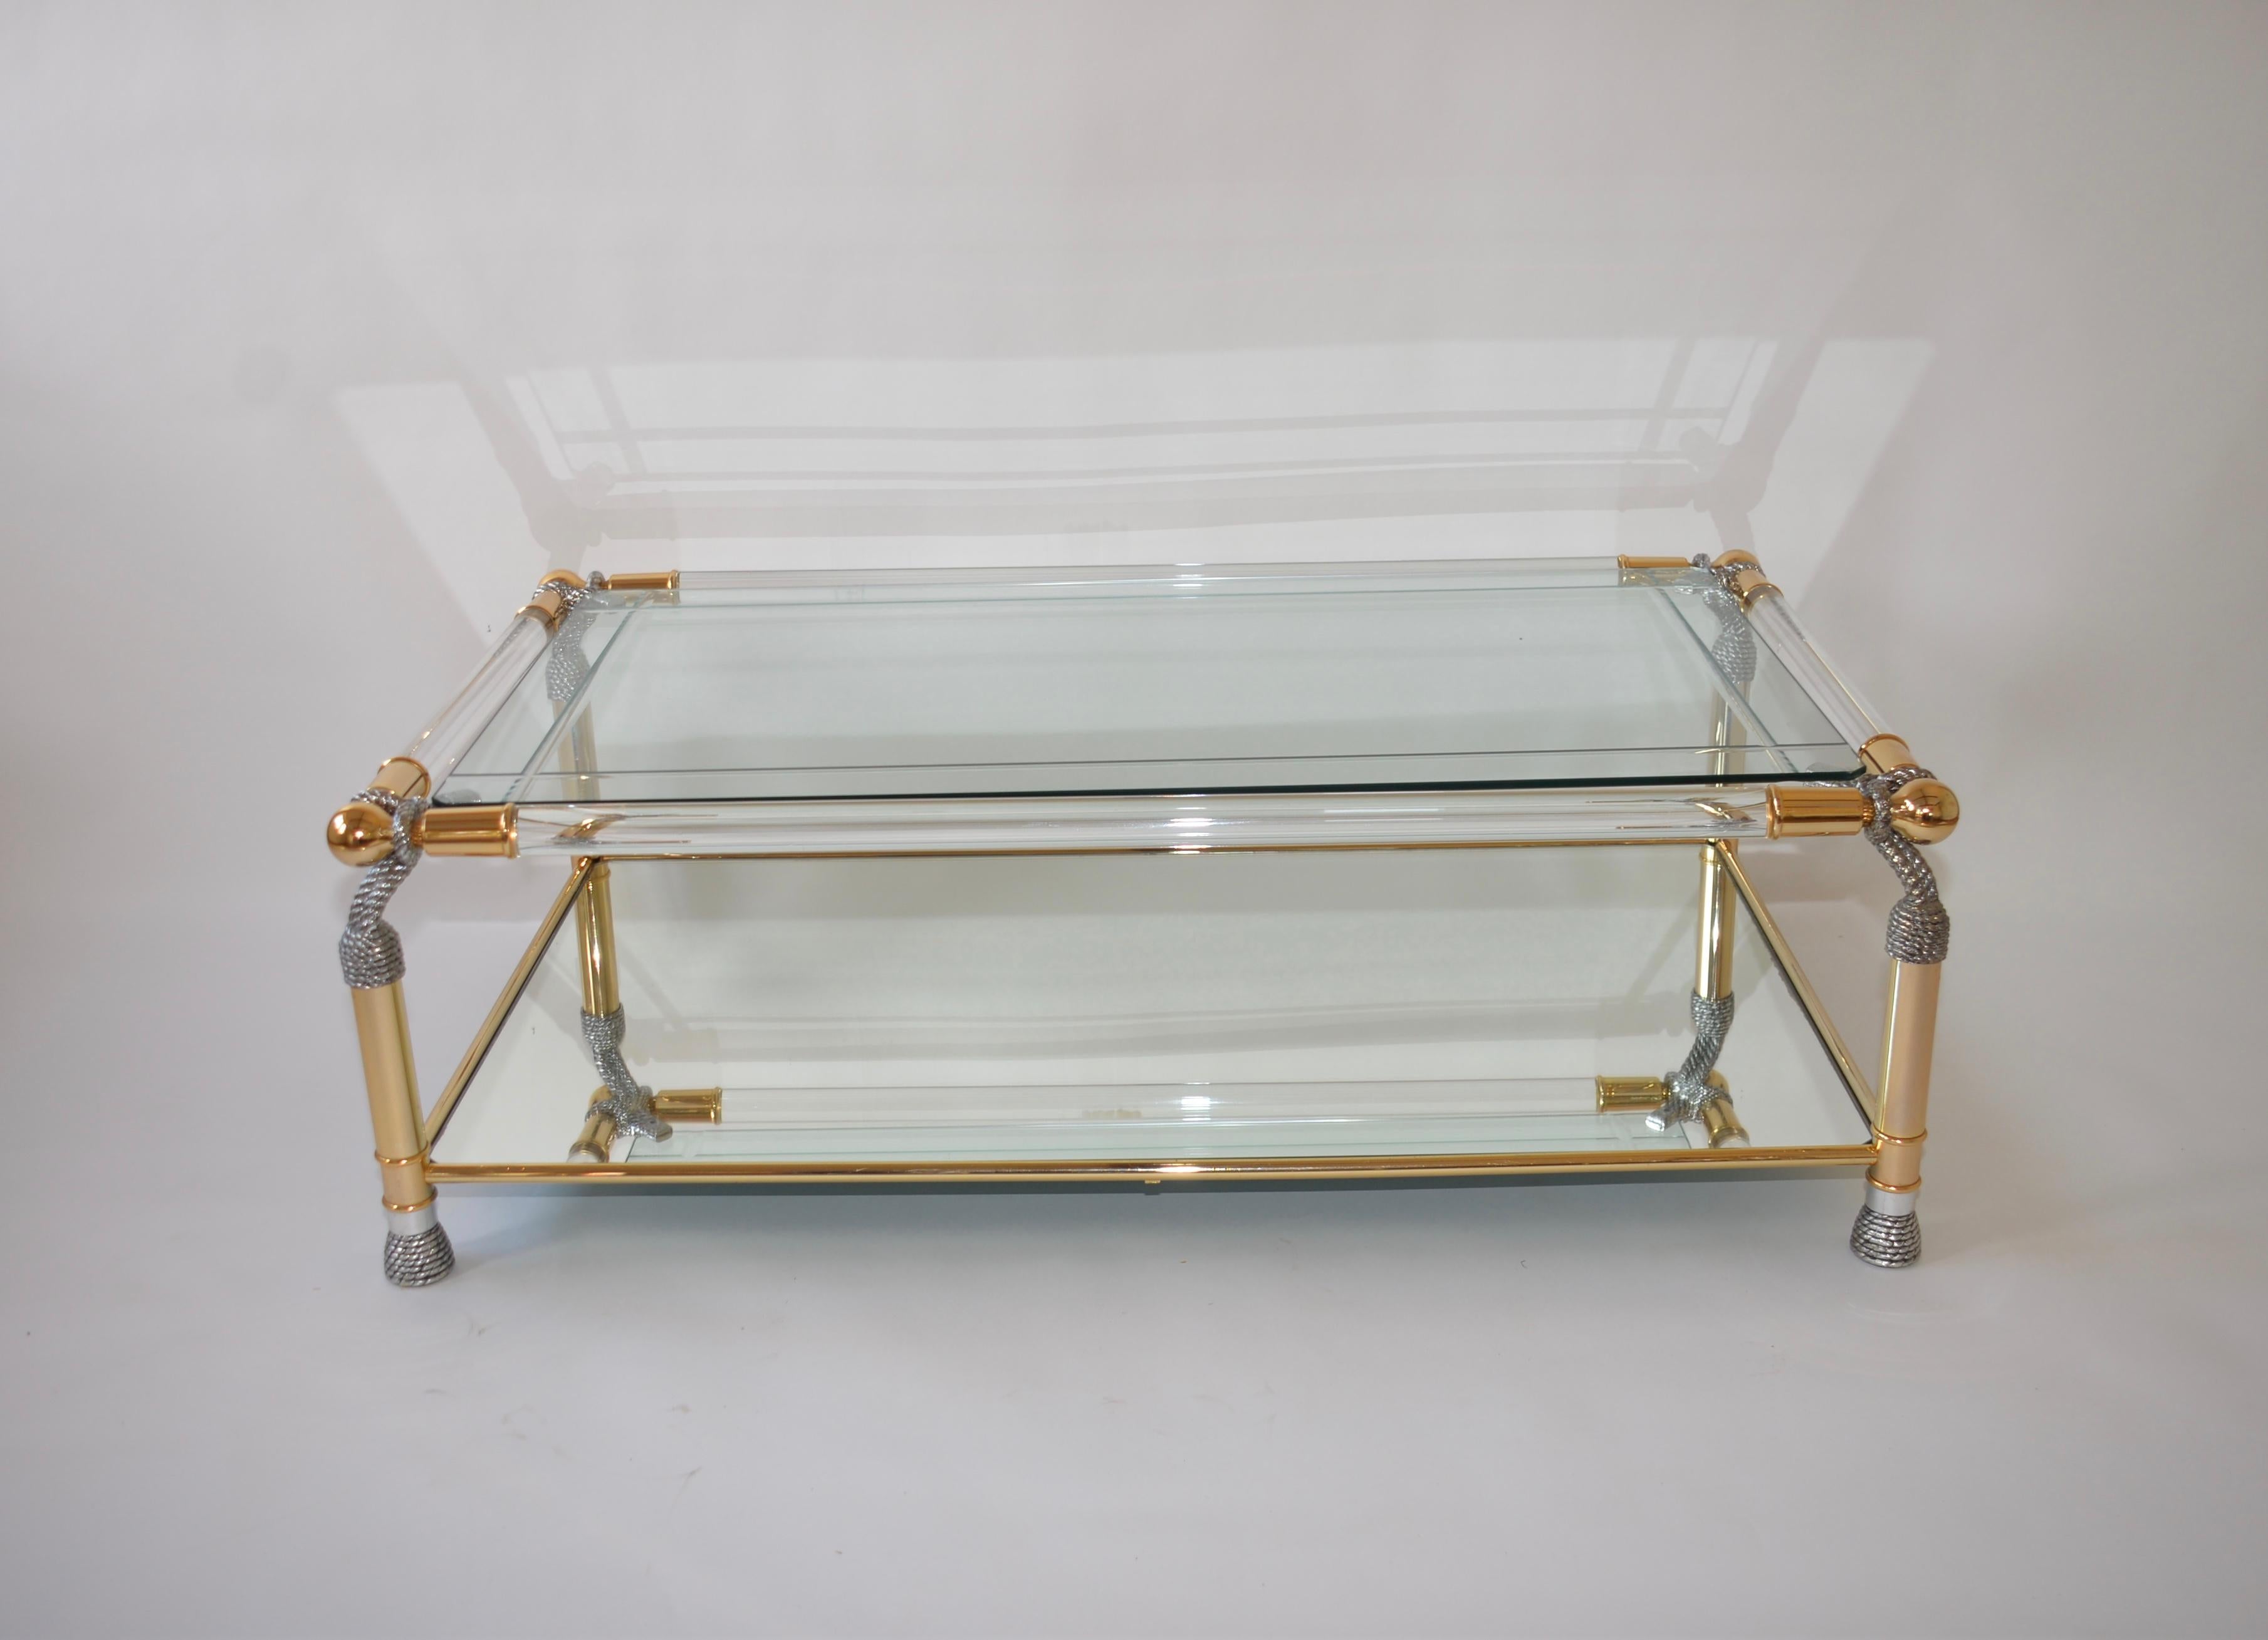 A striking Lucite, polished glass and beveled glass Hollywood Regency style coffee table. Two tiers, the top shelf is of beveled glass with the lower shelf being mirrored glass. Each corner has a twisted rope effect making this a very glamorous item.